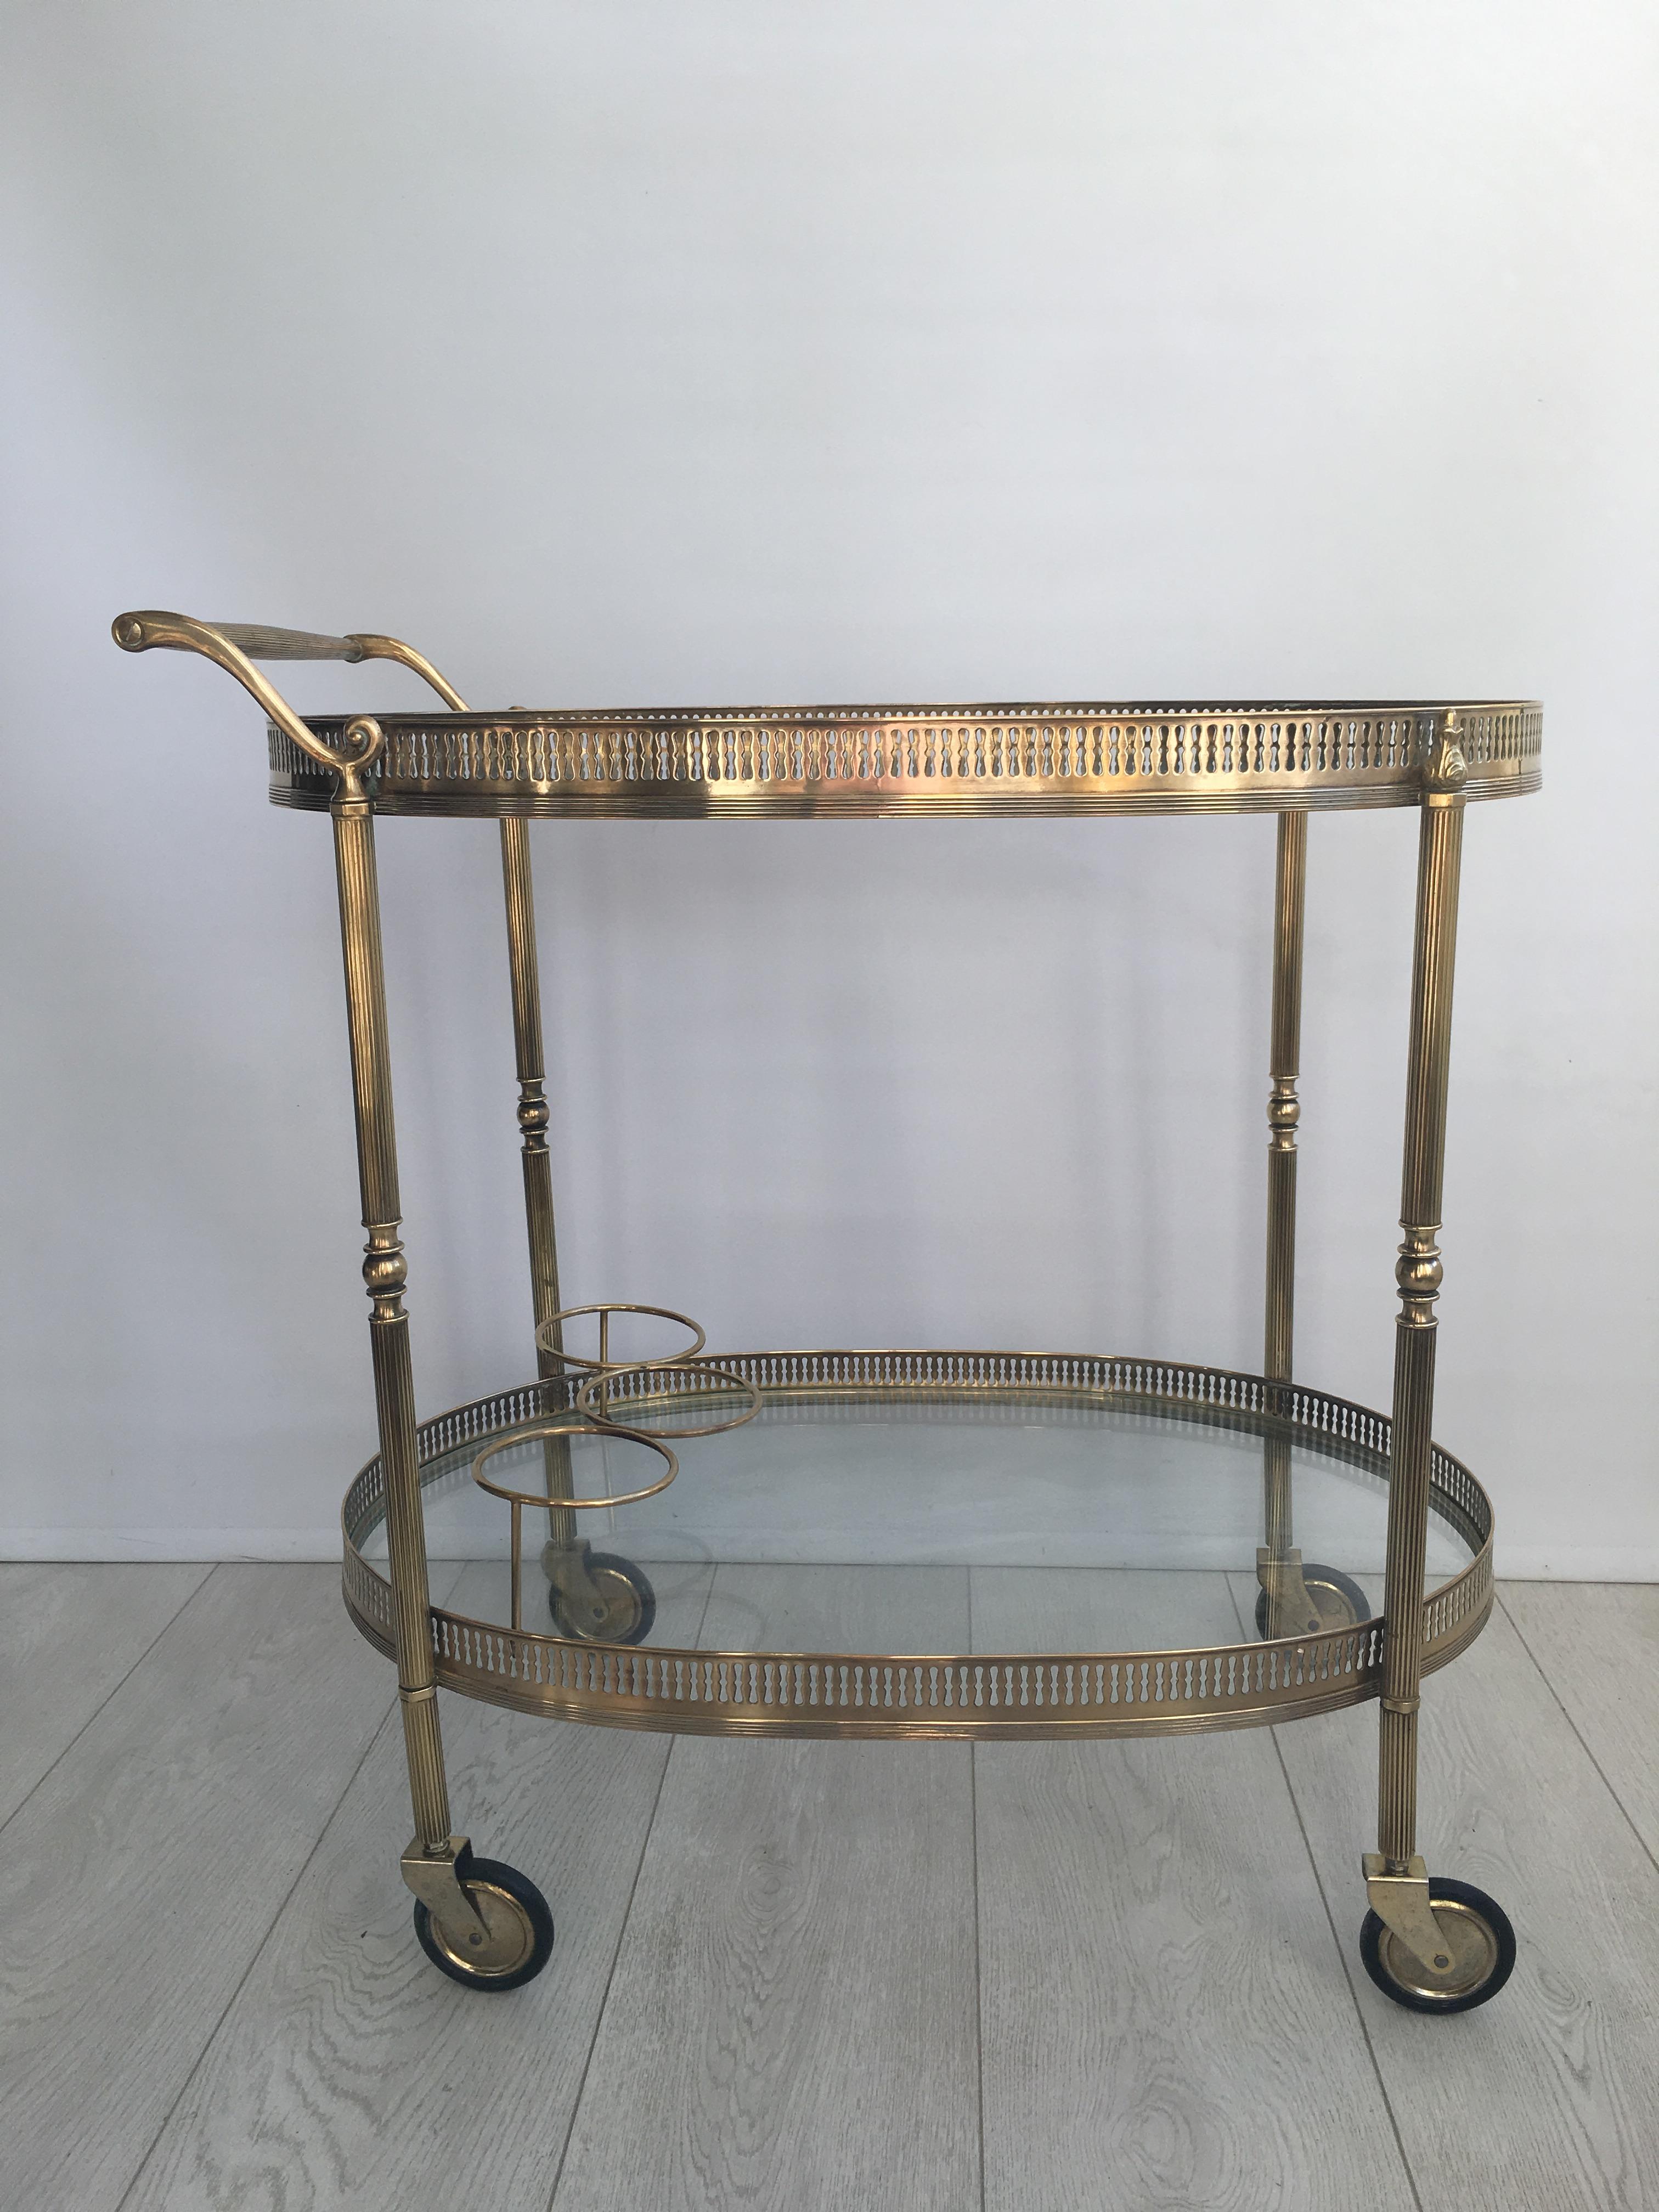 Great shape to this sizable drinks trolley from France, circa 1950.

Polished brass frame with bottle holder to lower tier.

Measures: Top tray measures 65.5cm wide, 41cm deep and stands 62.5cm to glass
Overall dimensions 68cm wide, 41cm deep